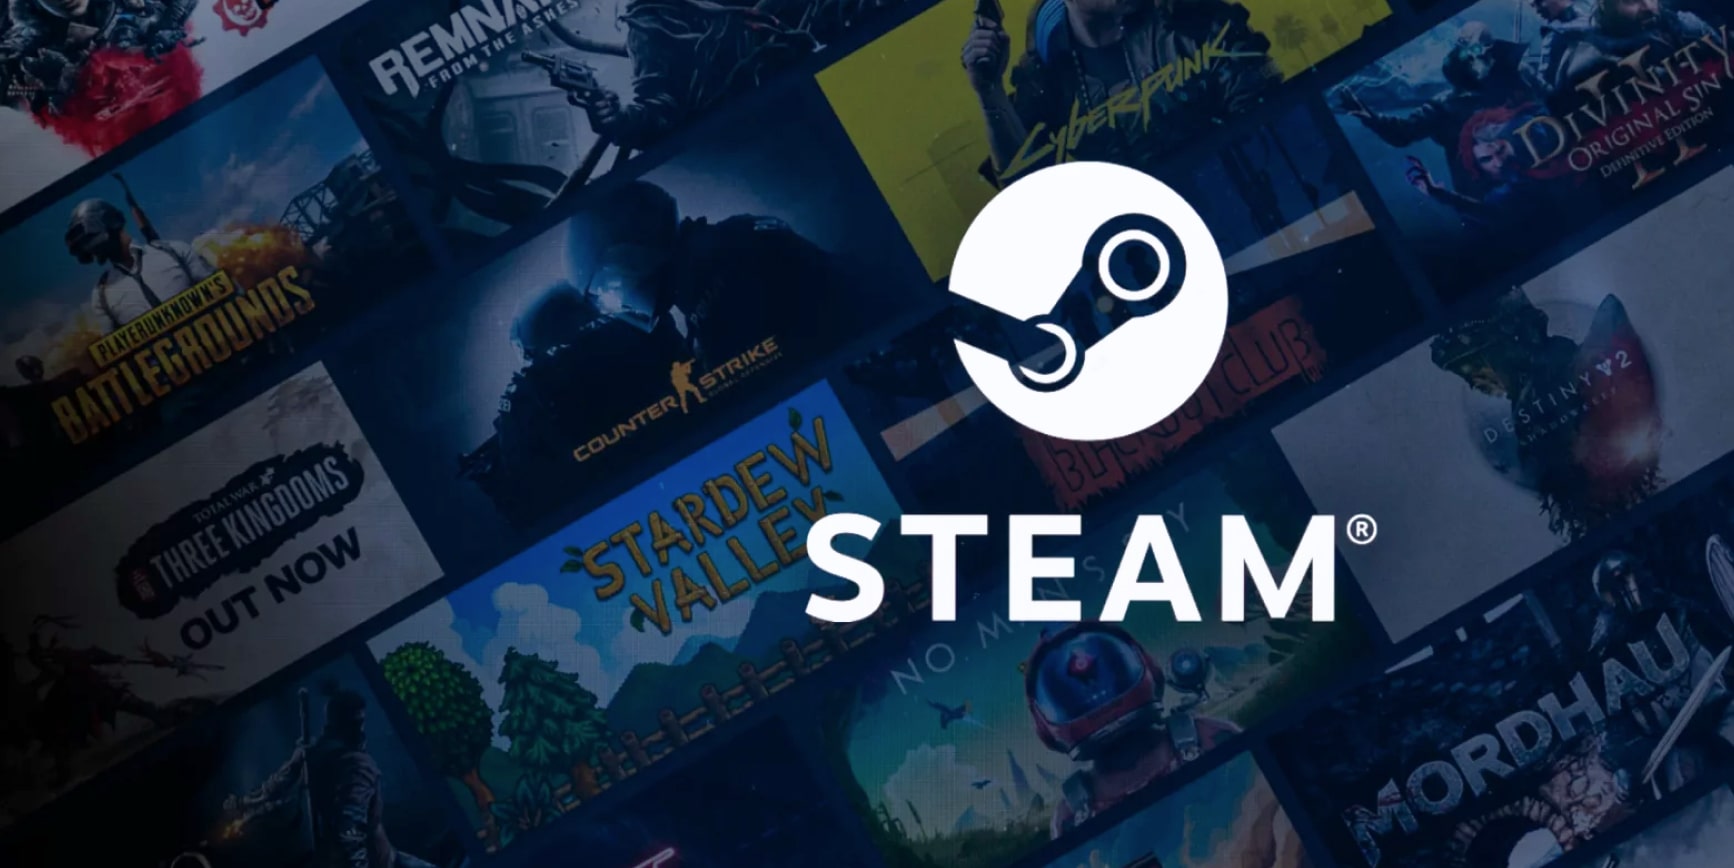 HTML holes exposed sensitive data for “private” Steam user